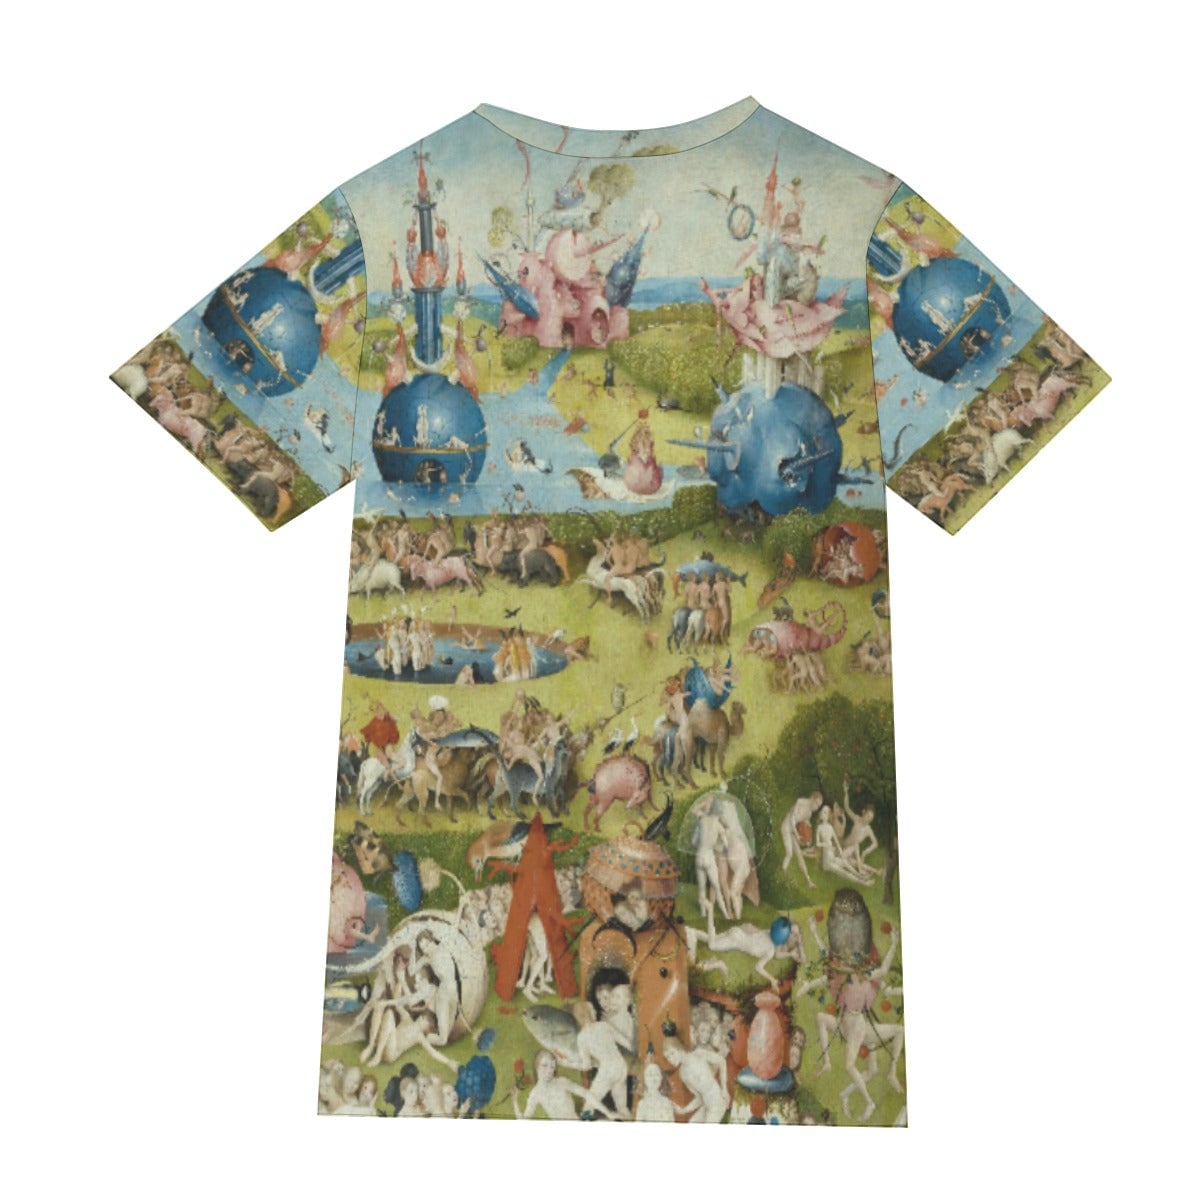 The Garden of Earthly Delights by Hieronymus Bosch T-Shirt